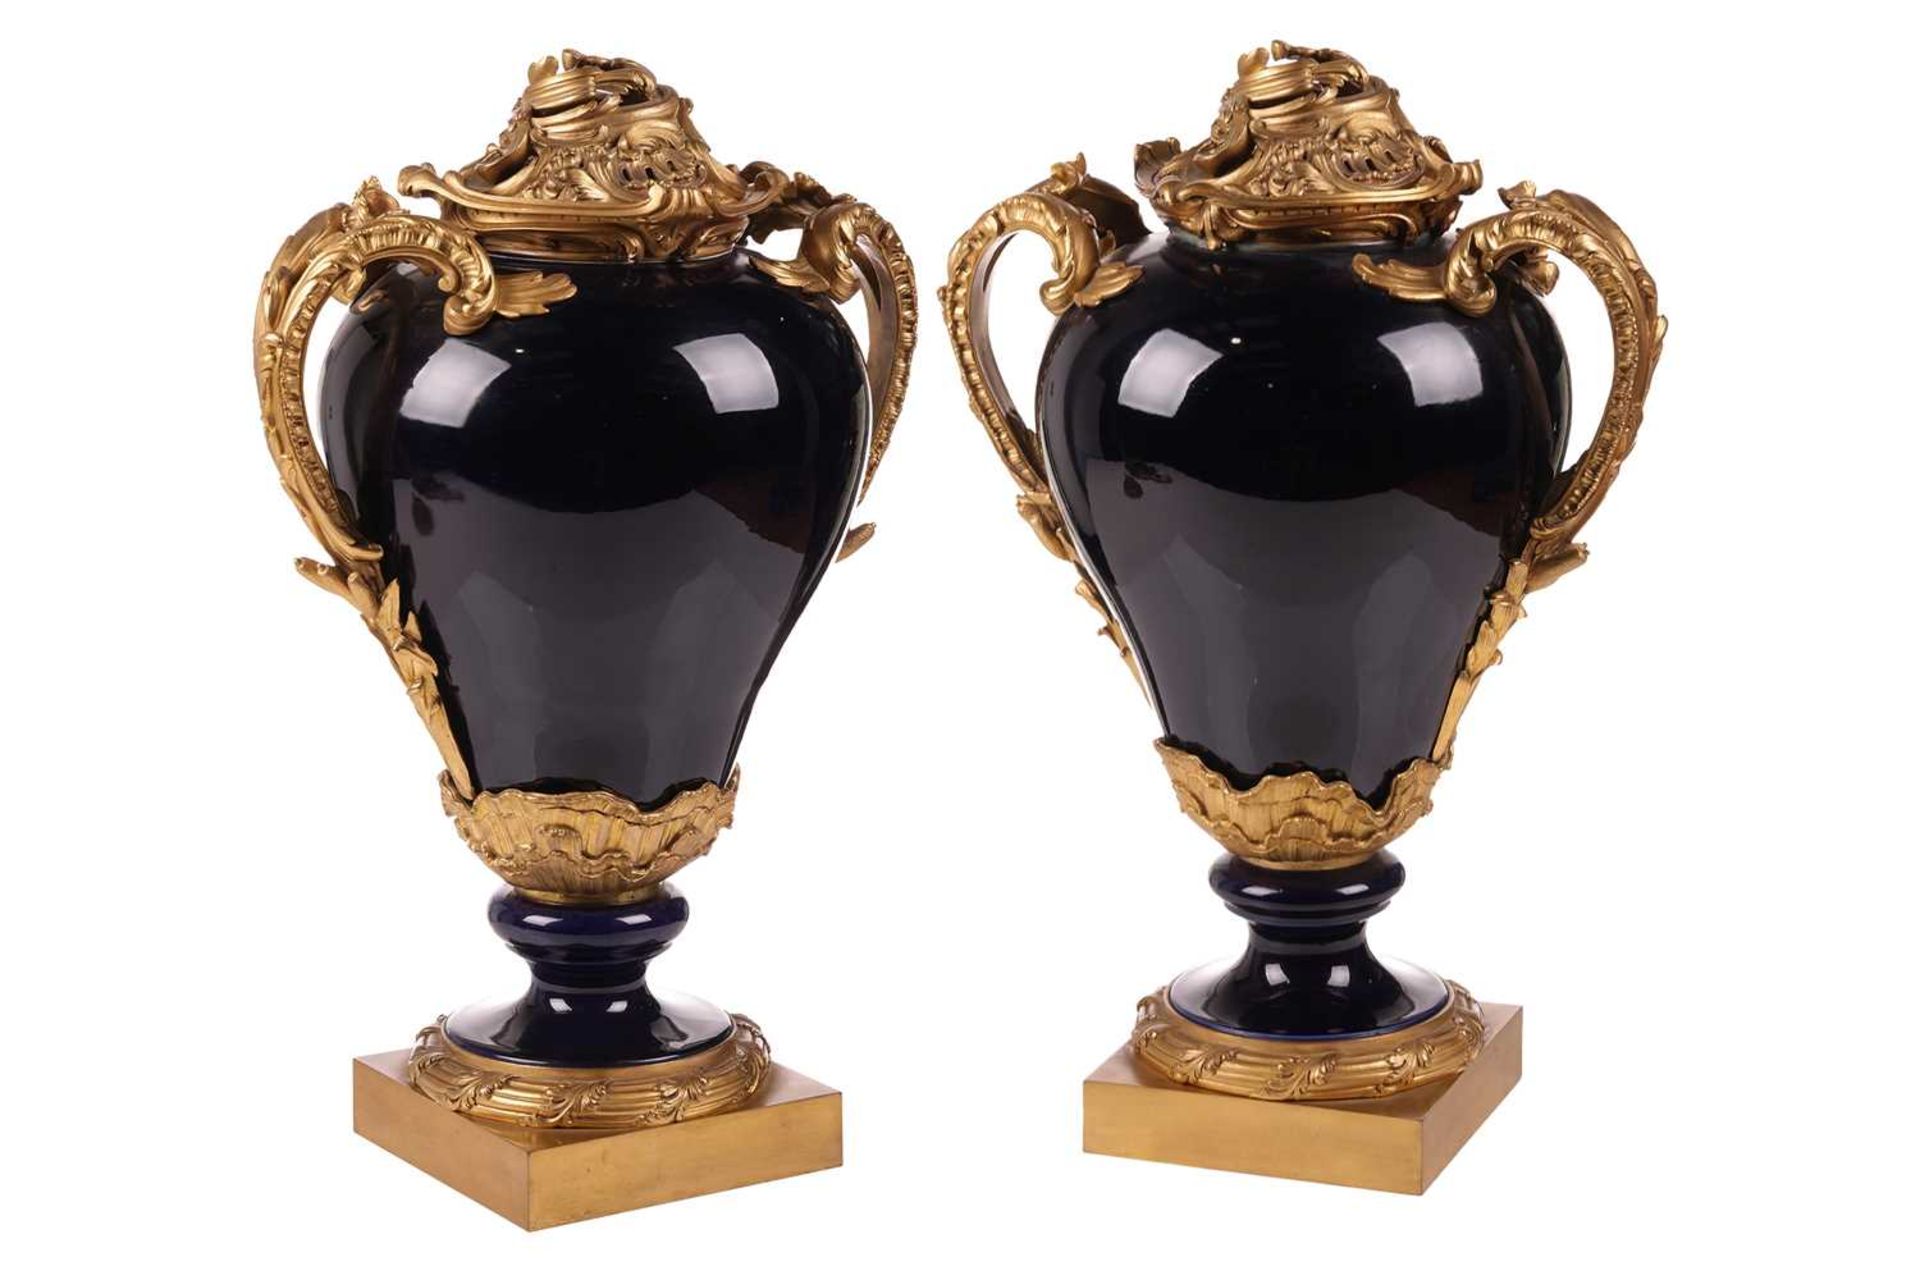 A pair of large French 19th-century porcelain and ormolu mounted vases, of imposing proportions, wit